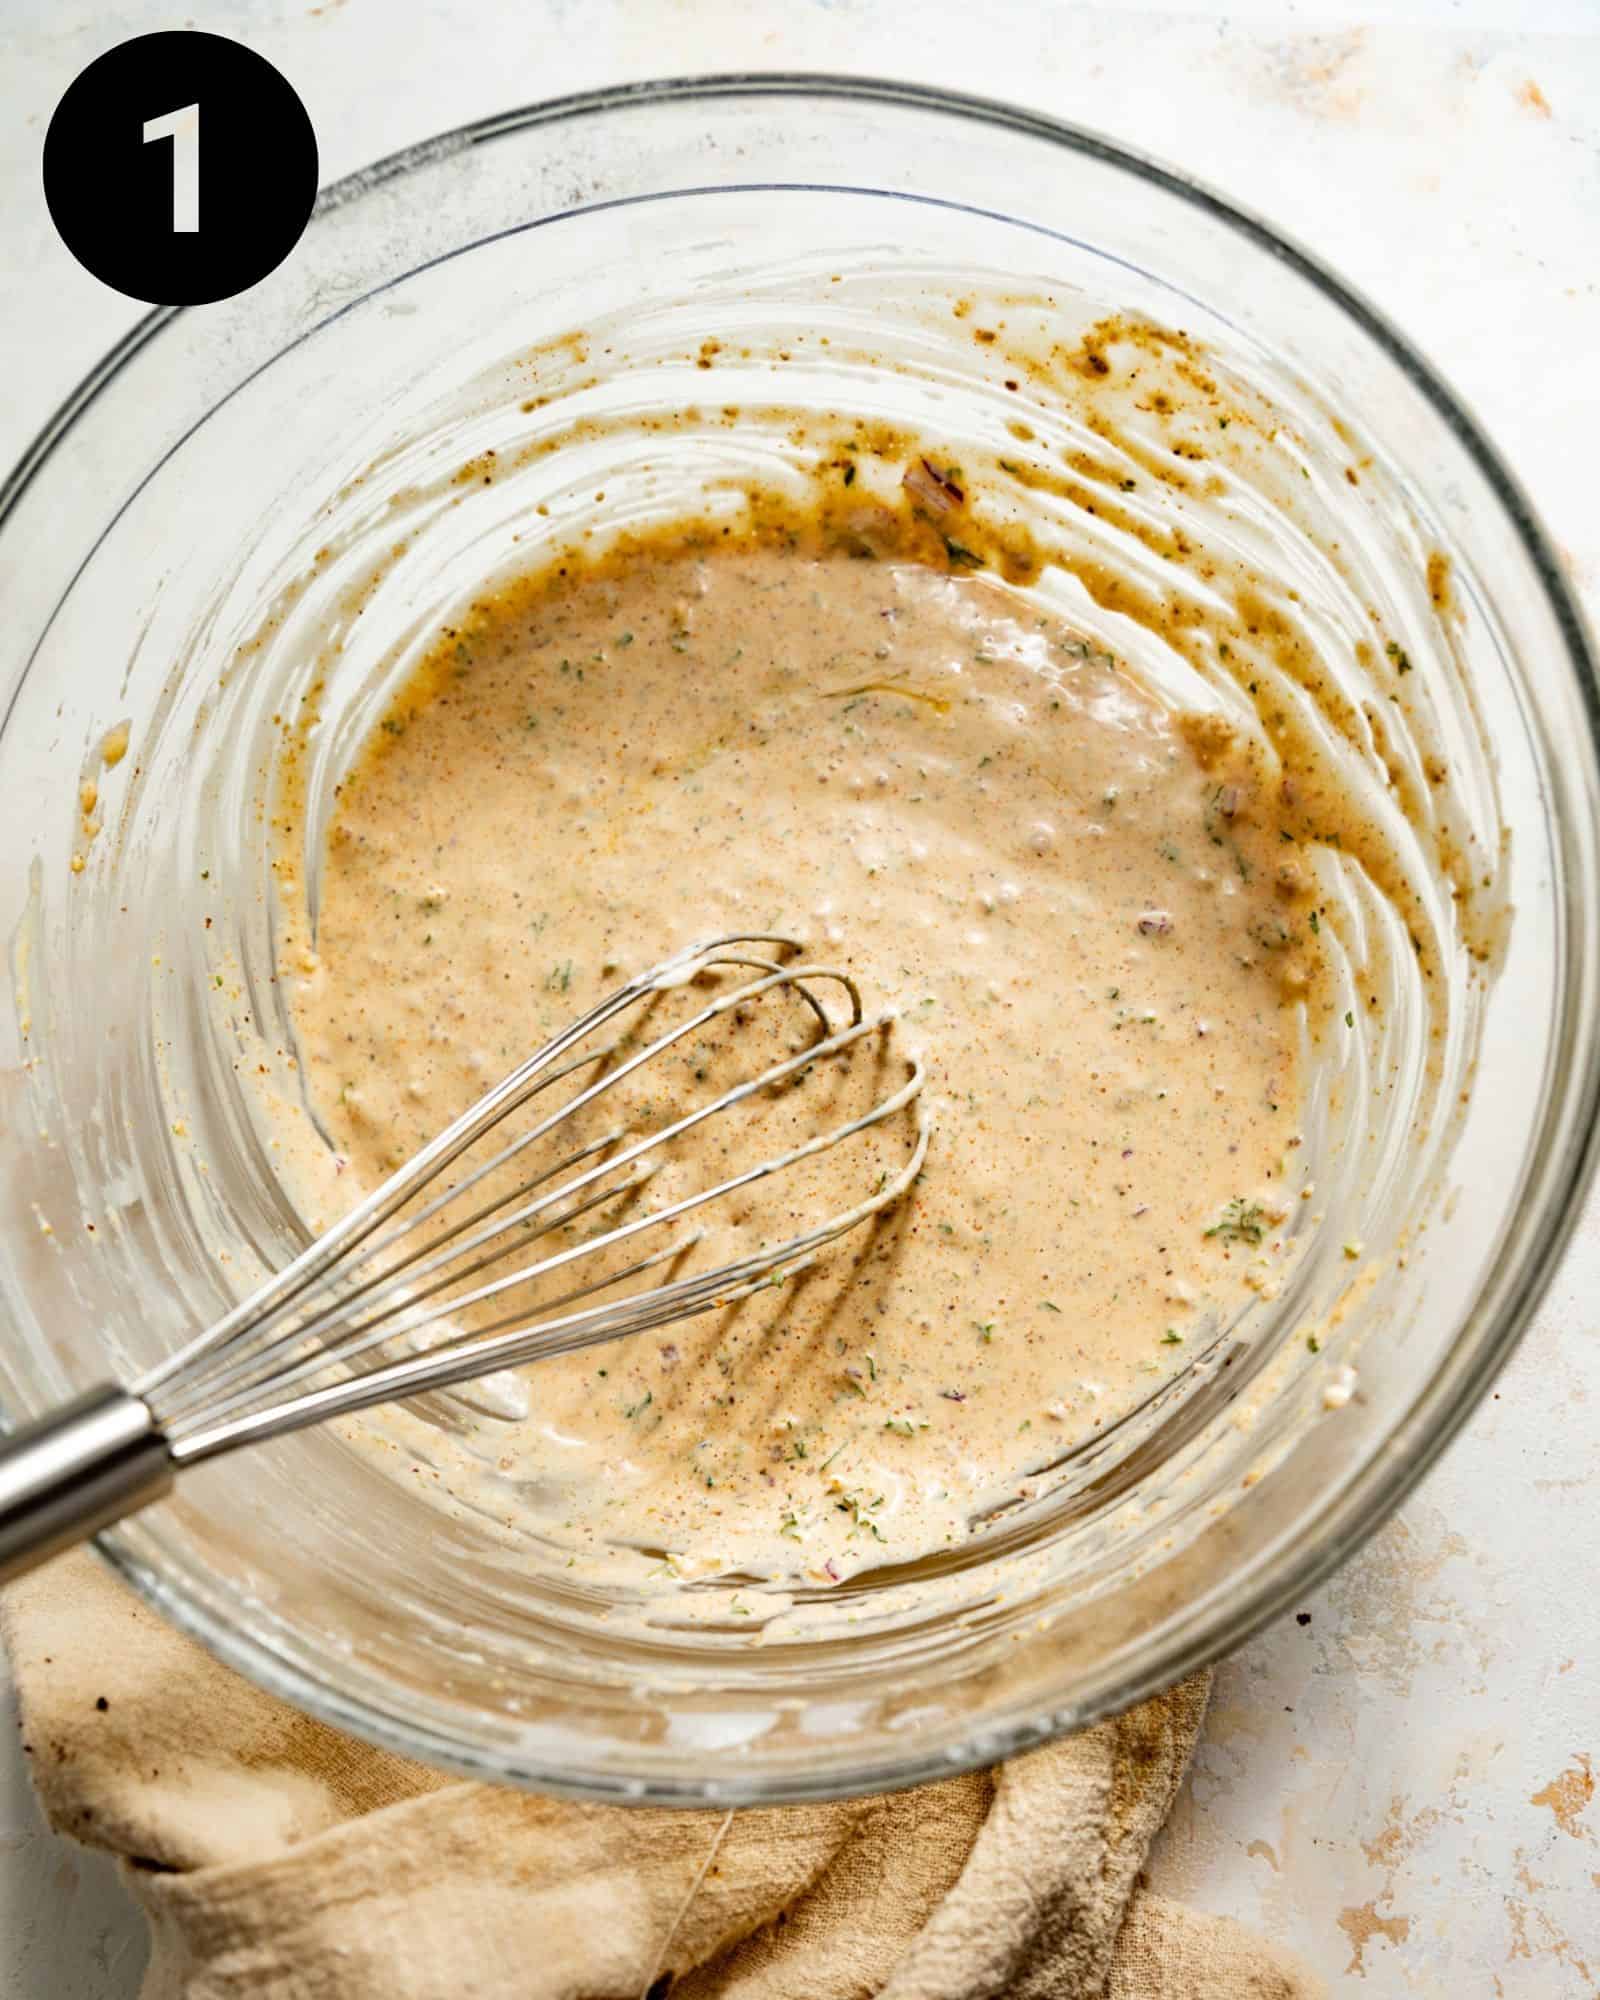 A whisk in a glass mixing bowl of mayo and seasonings to make crab cakes.